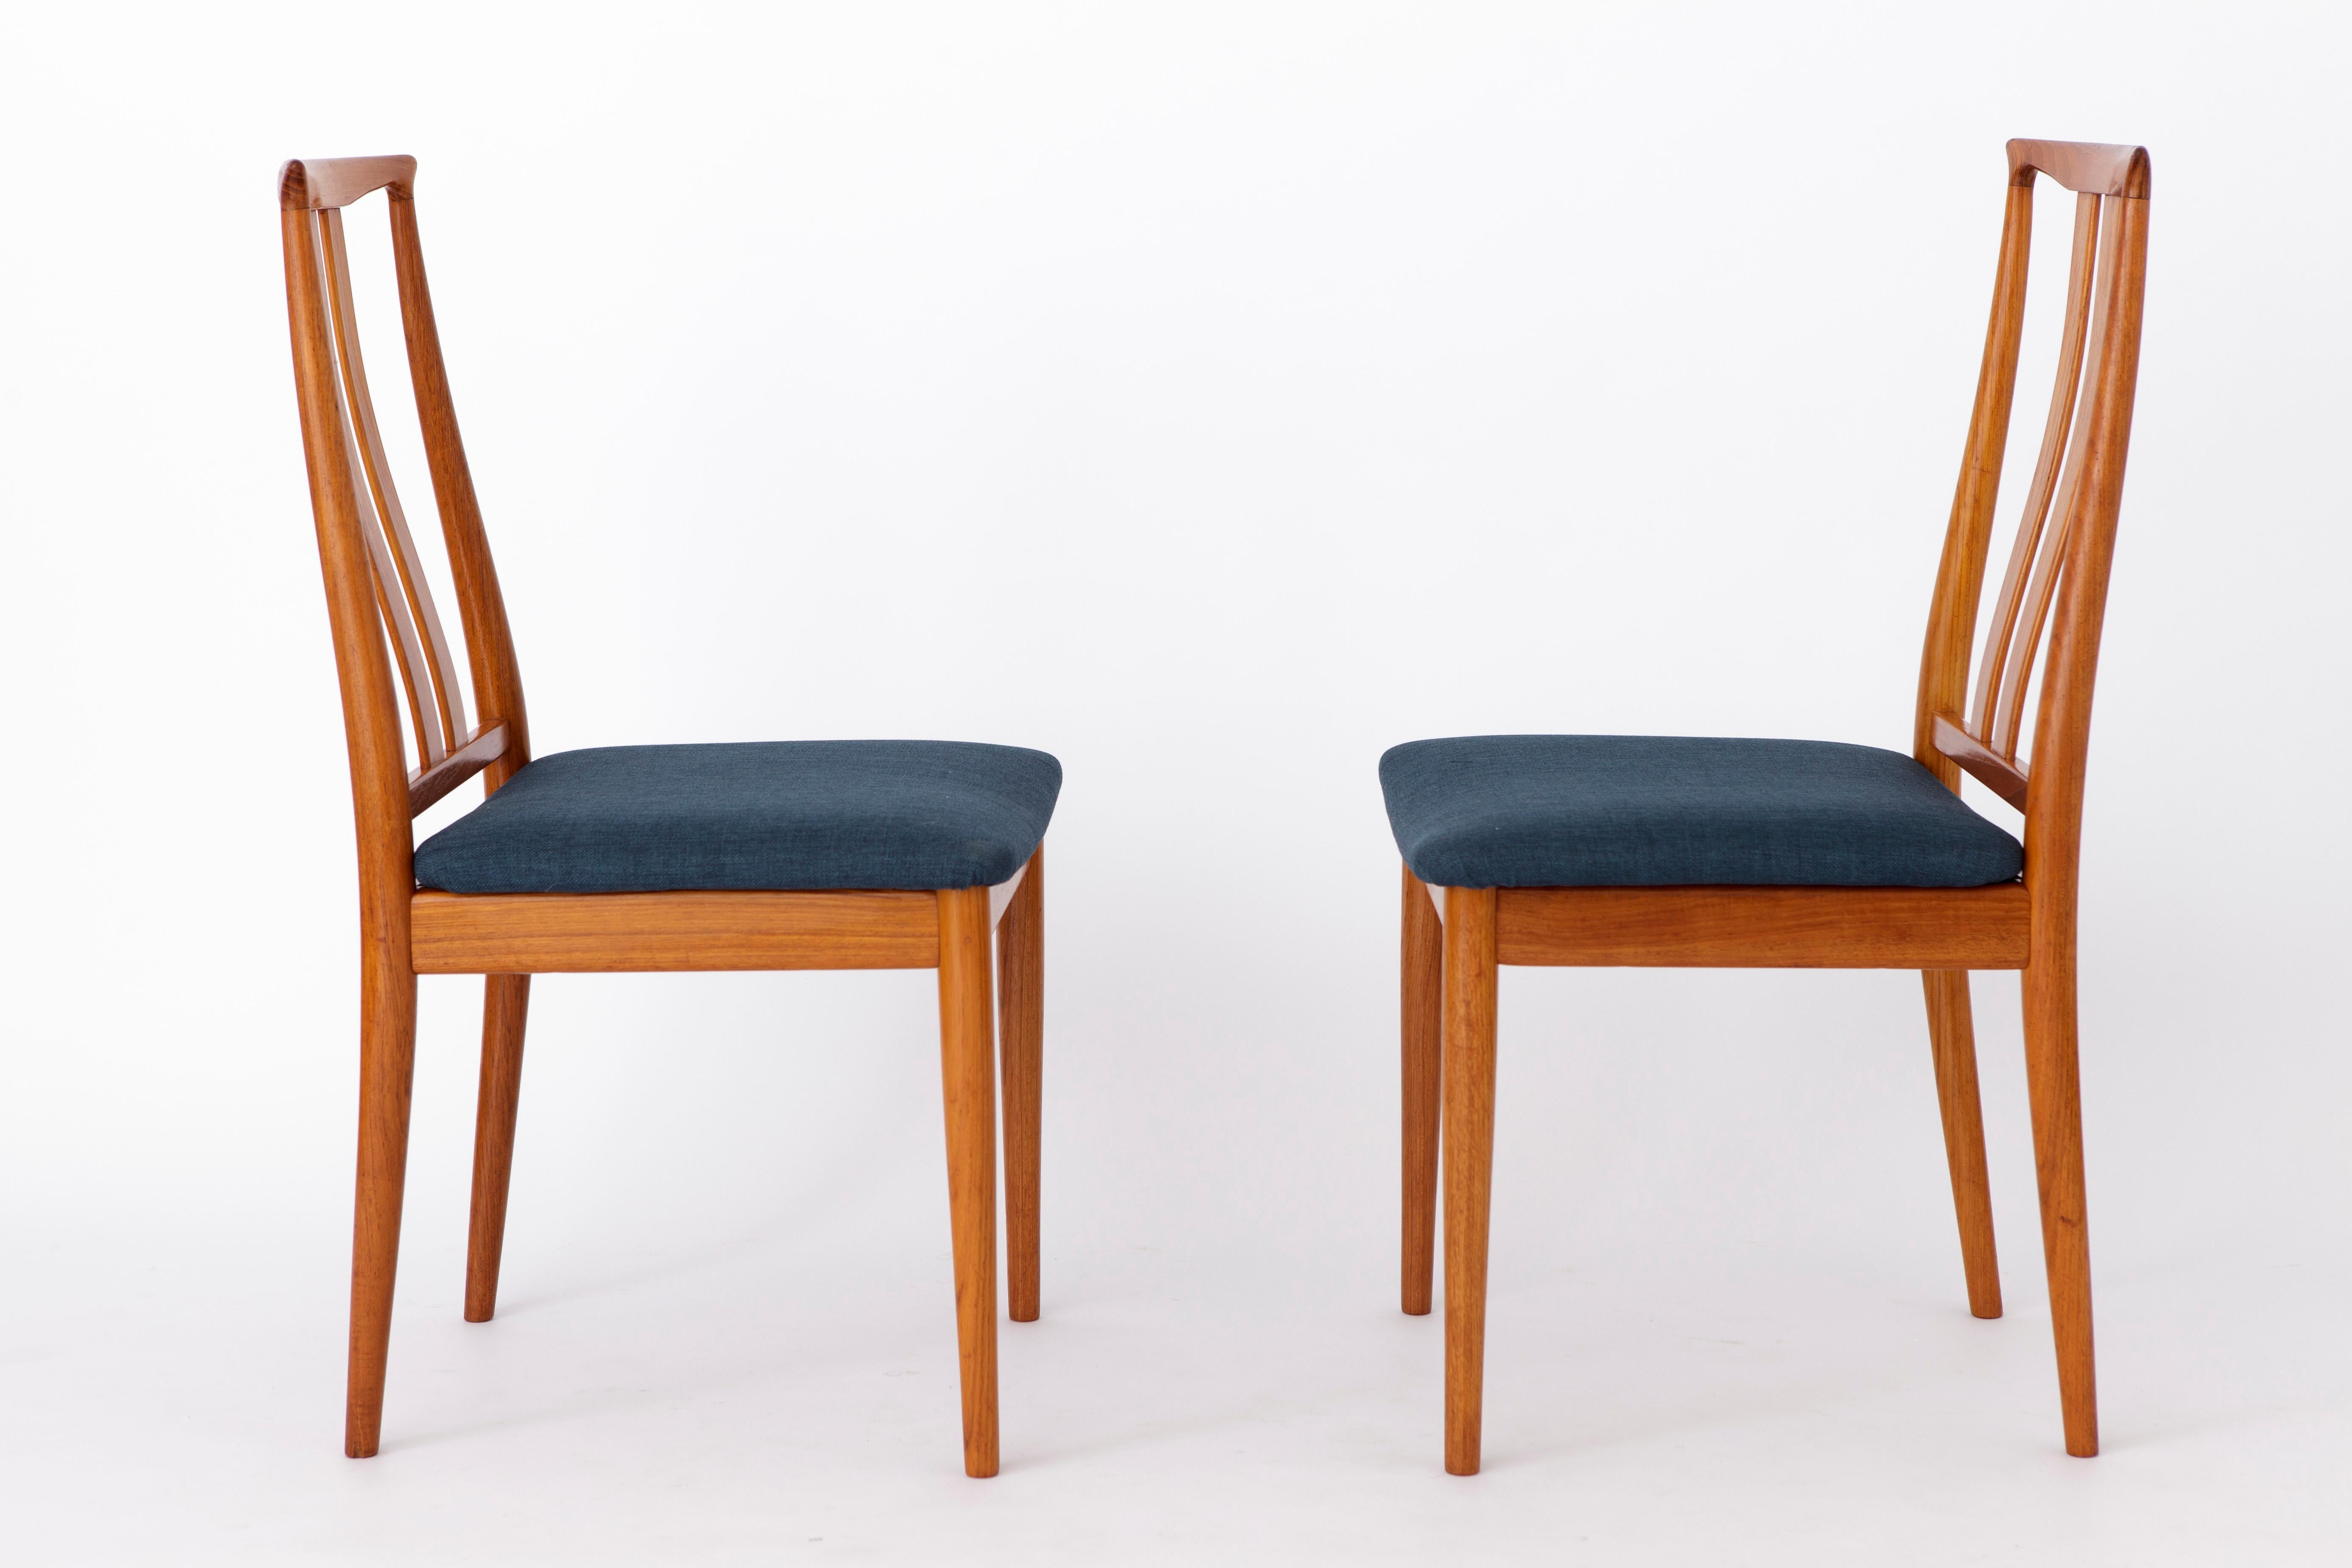 Polished 4 Vintage Dining Chairs, 1960s, Danish, Teak For Sale